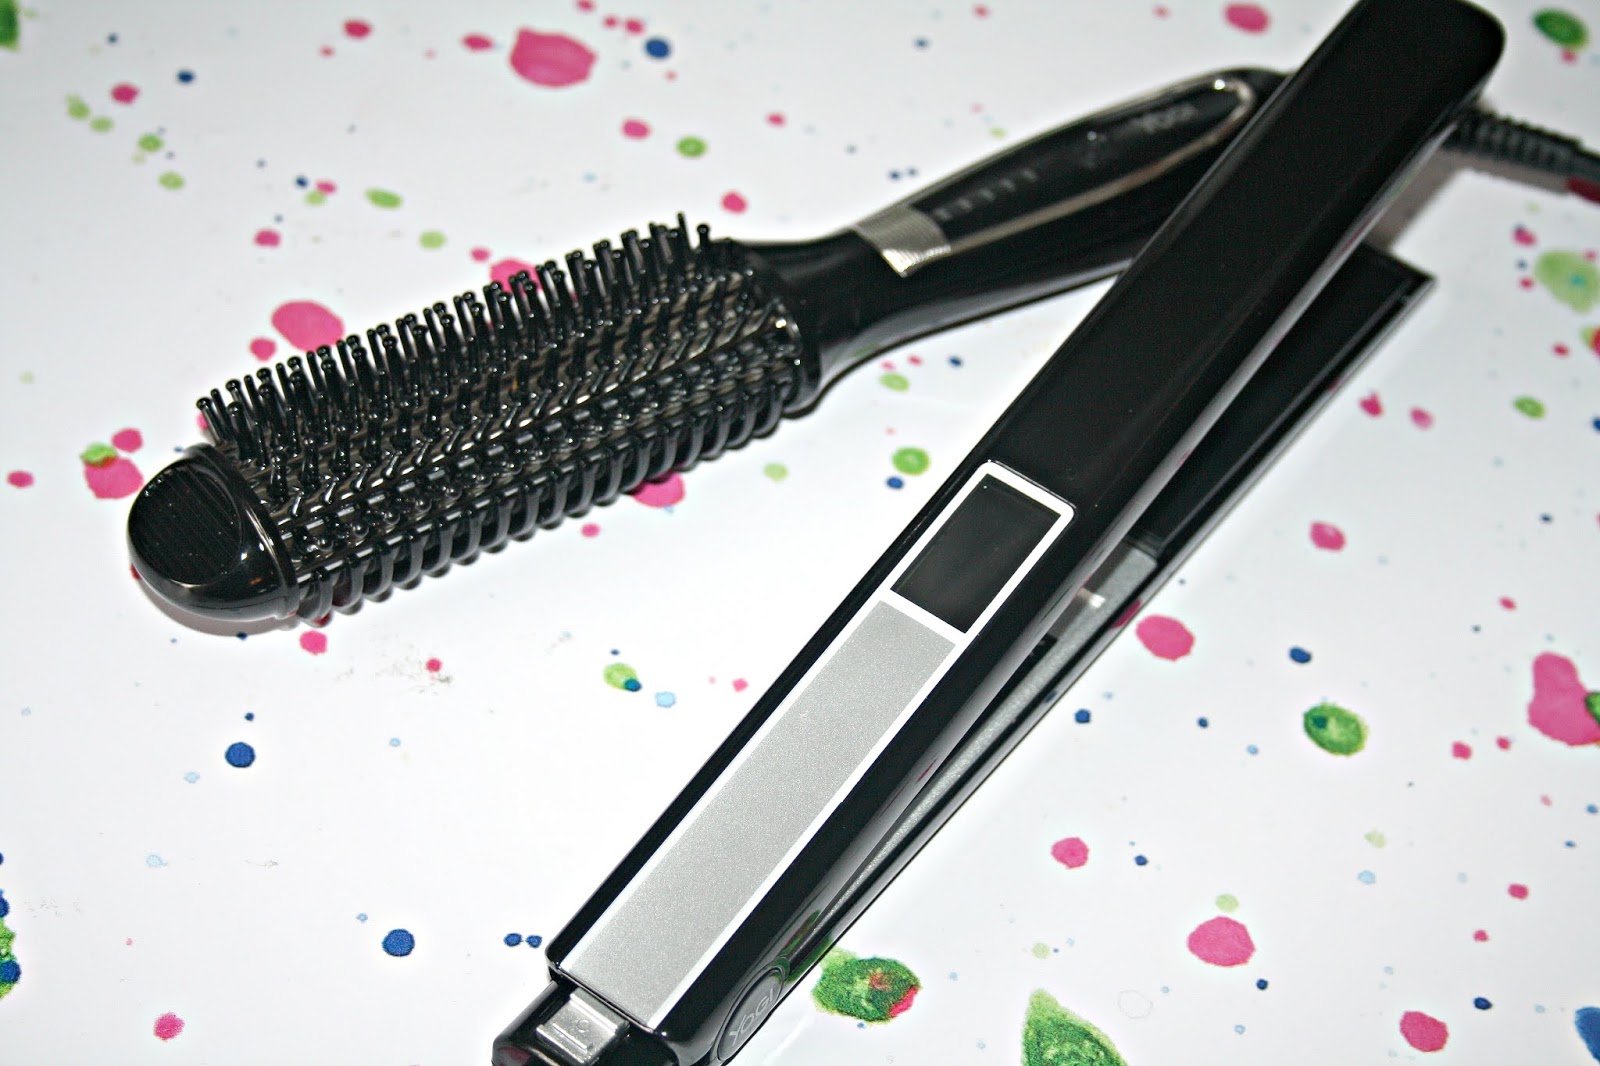 Beautyqueenuk | A UK Beauty and Lifestyle Blog: Yogi Hair Styling Tools